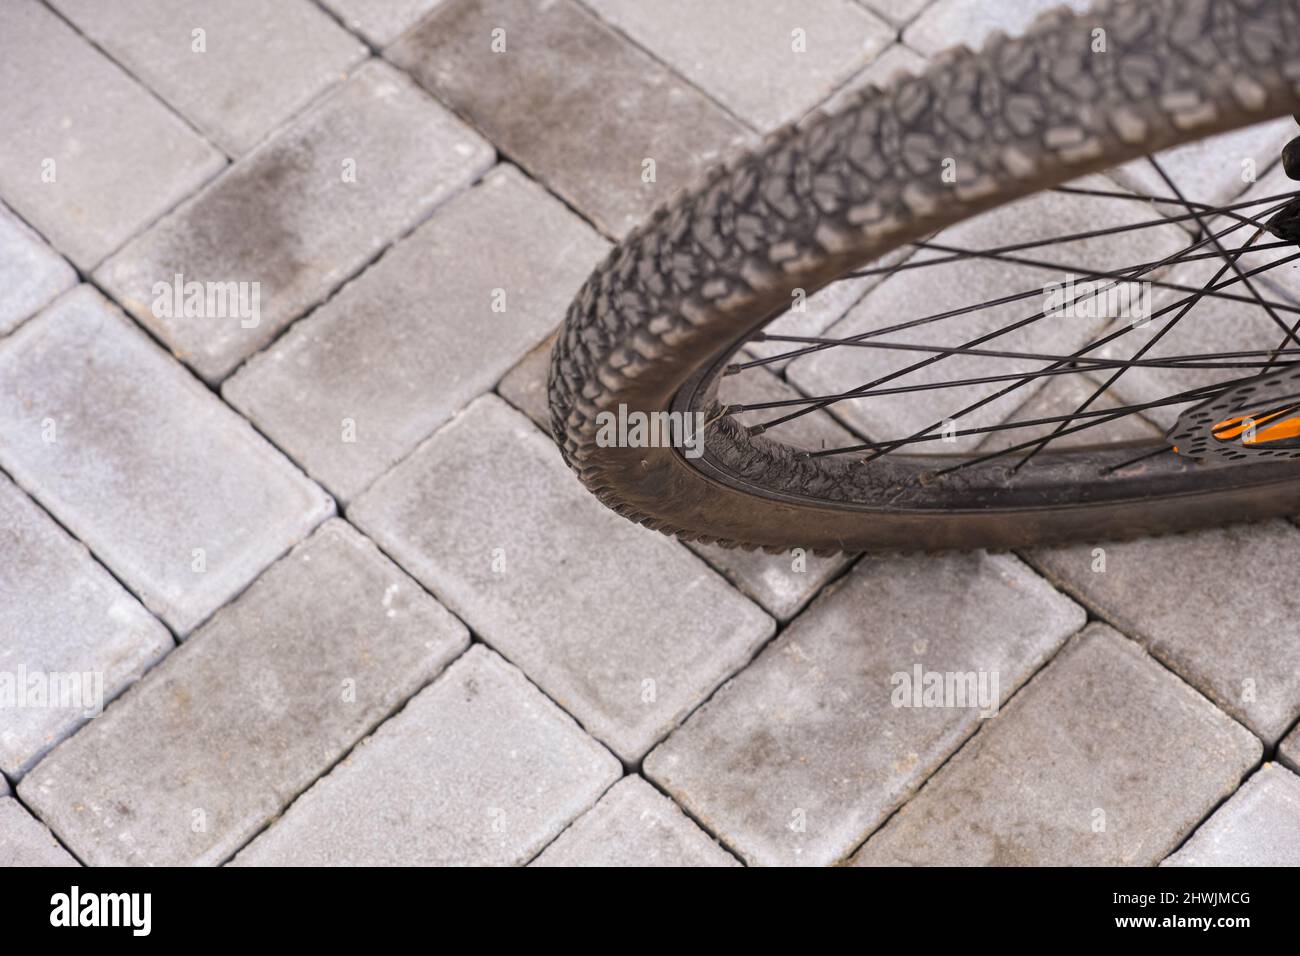 Close-up of a bicycle wheel on a paving slab. Stock Photo